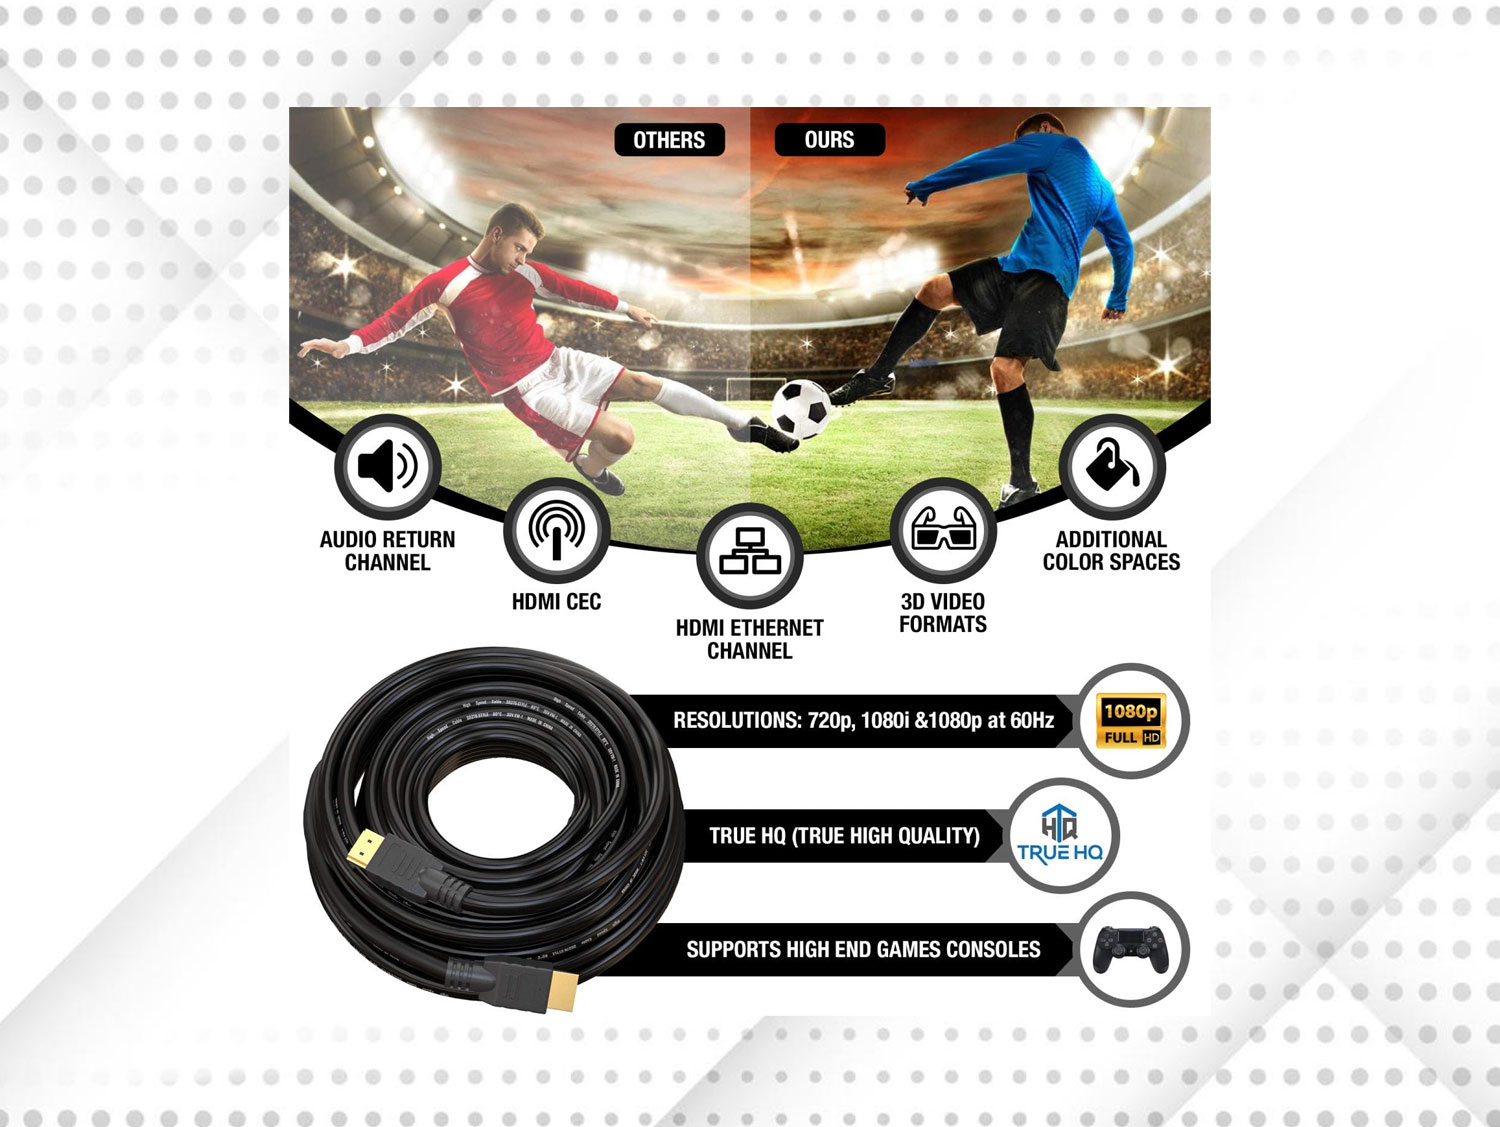 A setup visual highlighting the 5-meter length of the HDMI cable extending between devices in an event setting